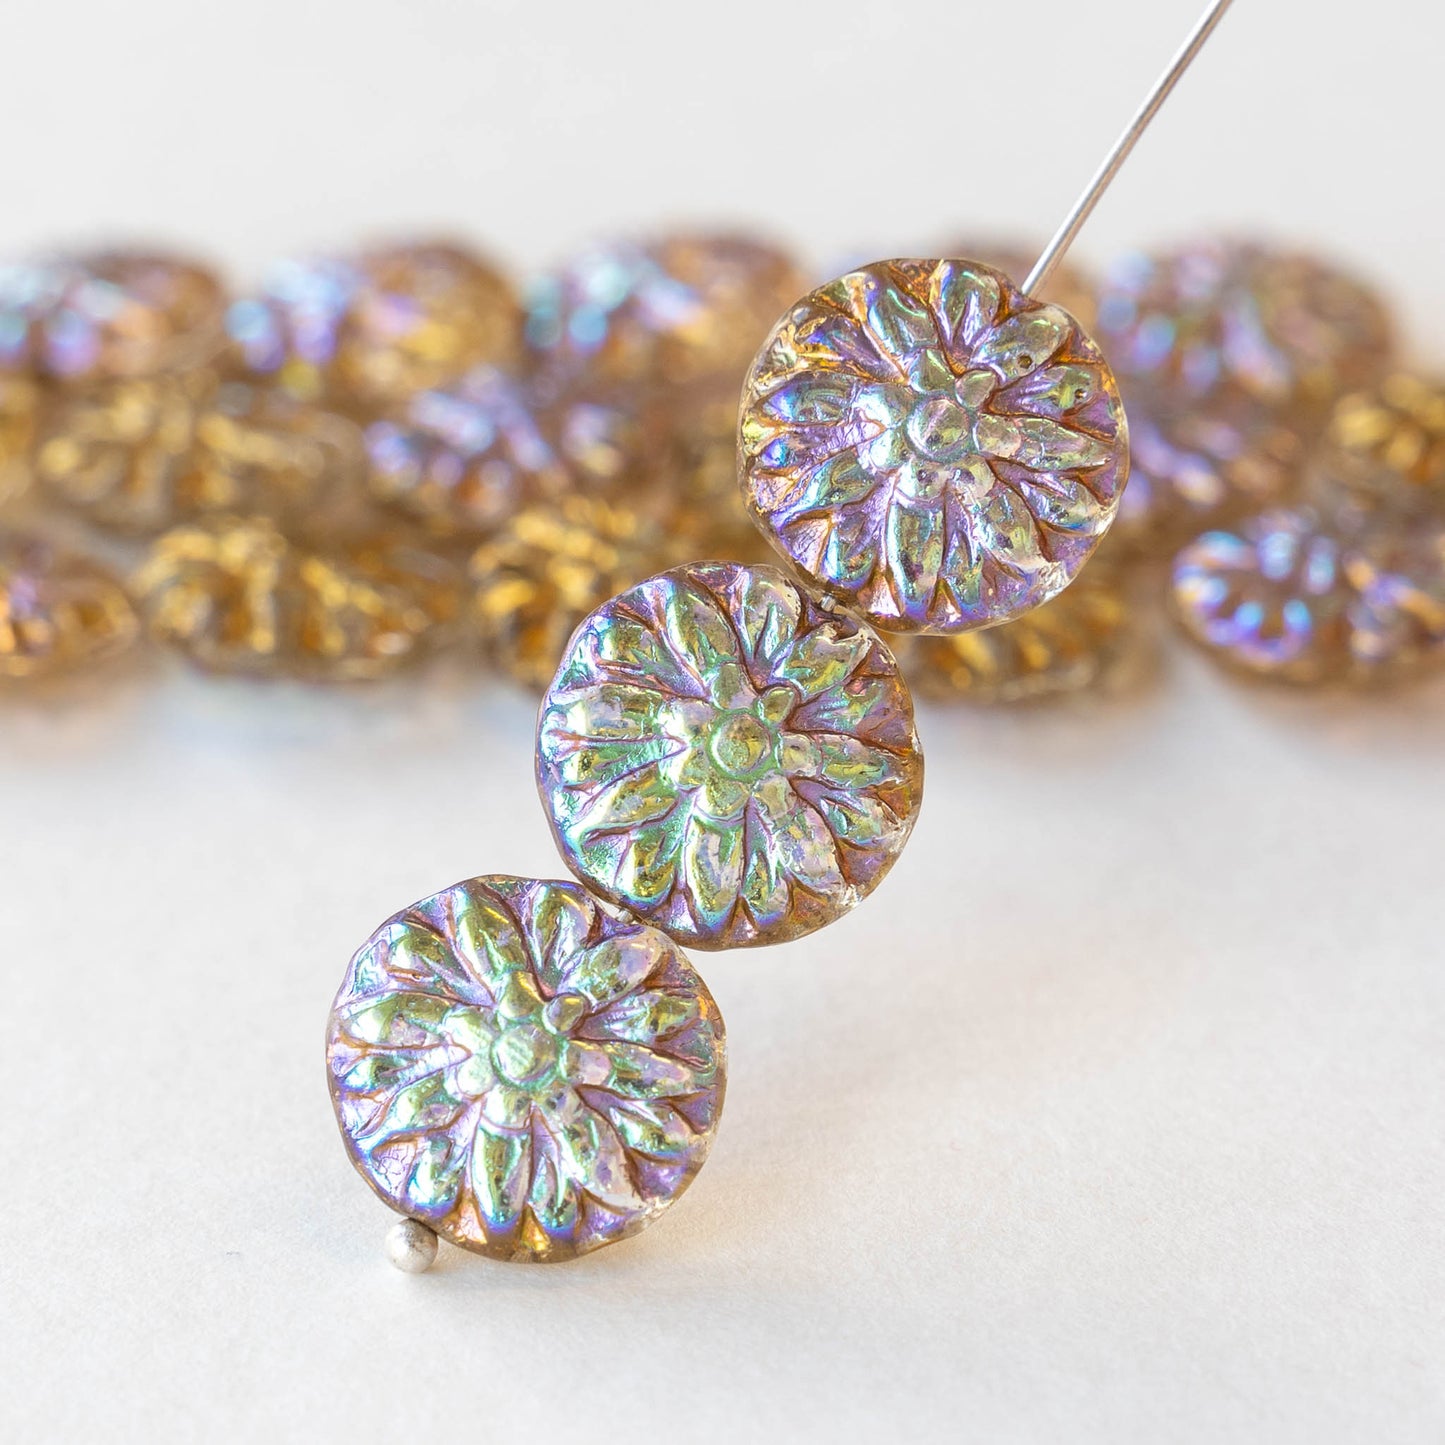 14mm Dahlia Flower Beads - Crystal AB with Gold Wash - 10 Beads